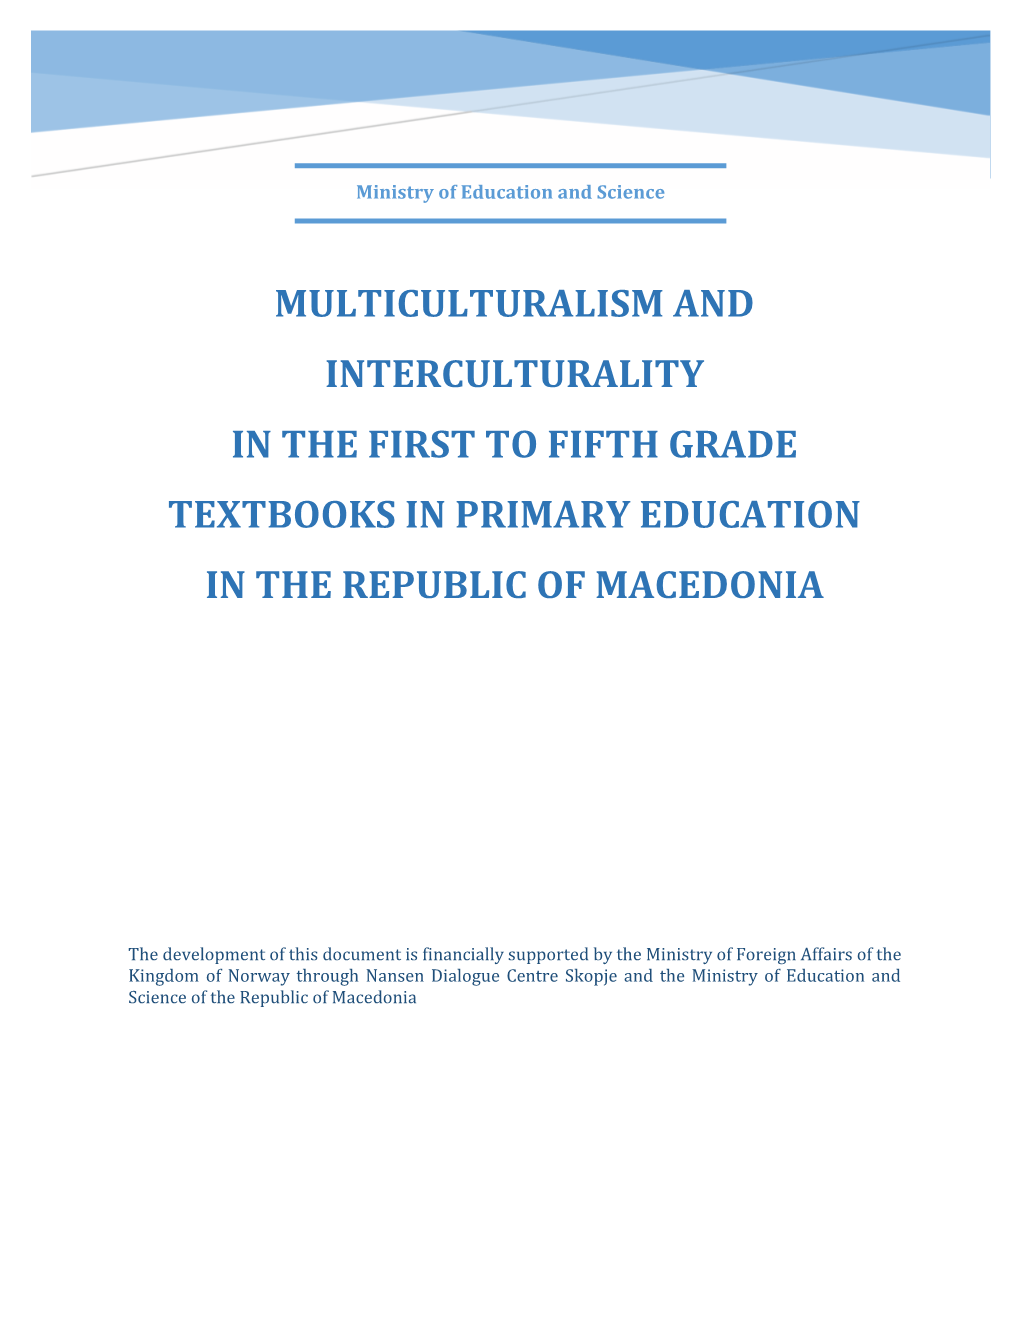 Multiculturalism and Interculturality in the First to Fifth Grade Textbooks in Primary Education